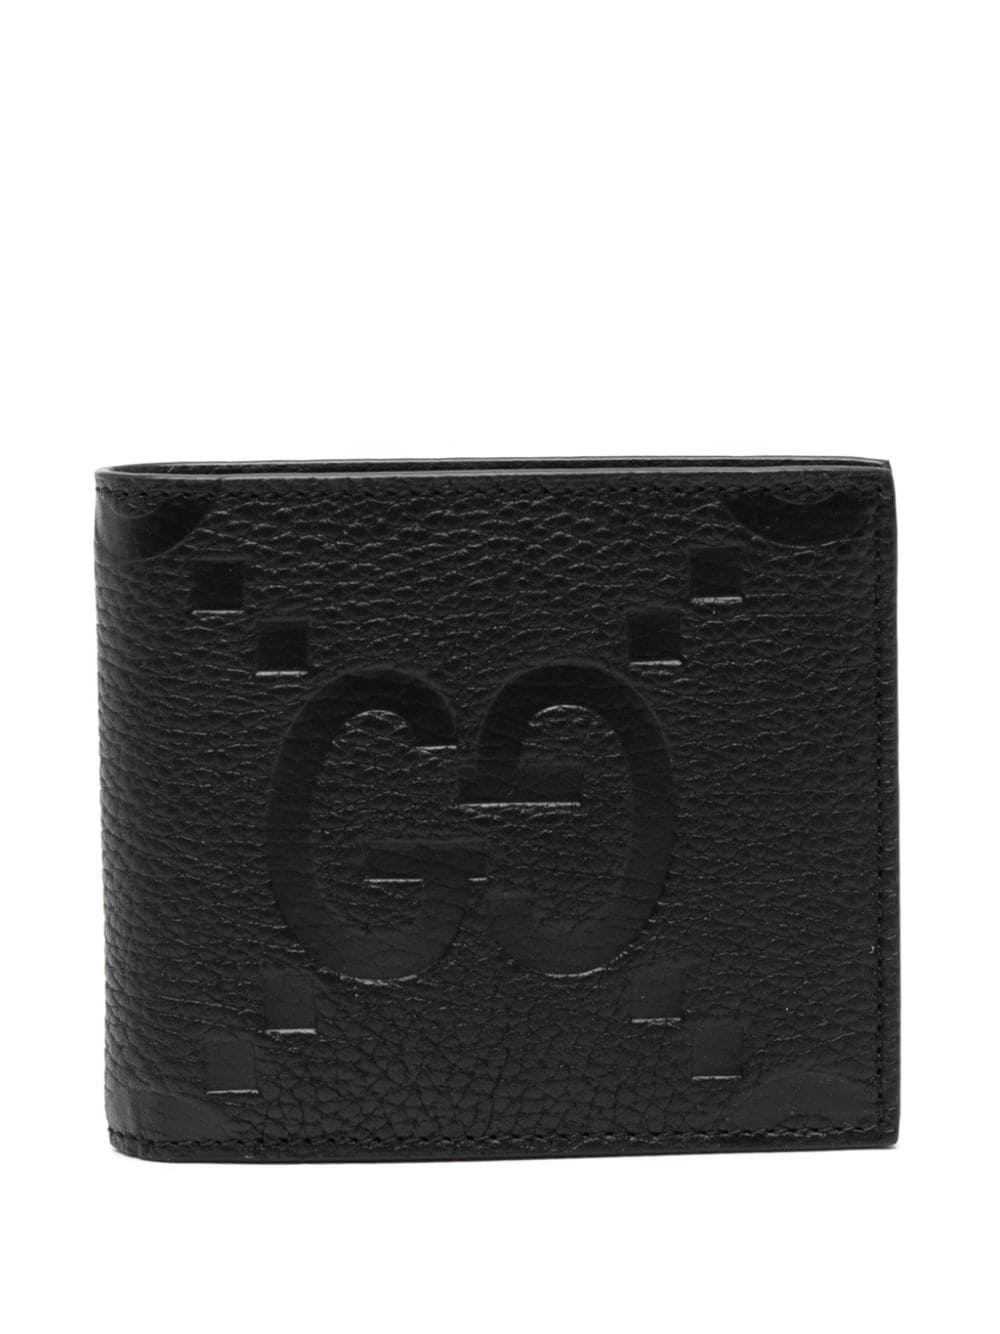 Image 1 of Gucci Jumbo GG leather wallet